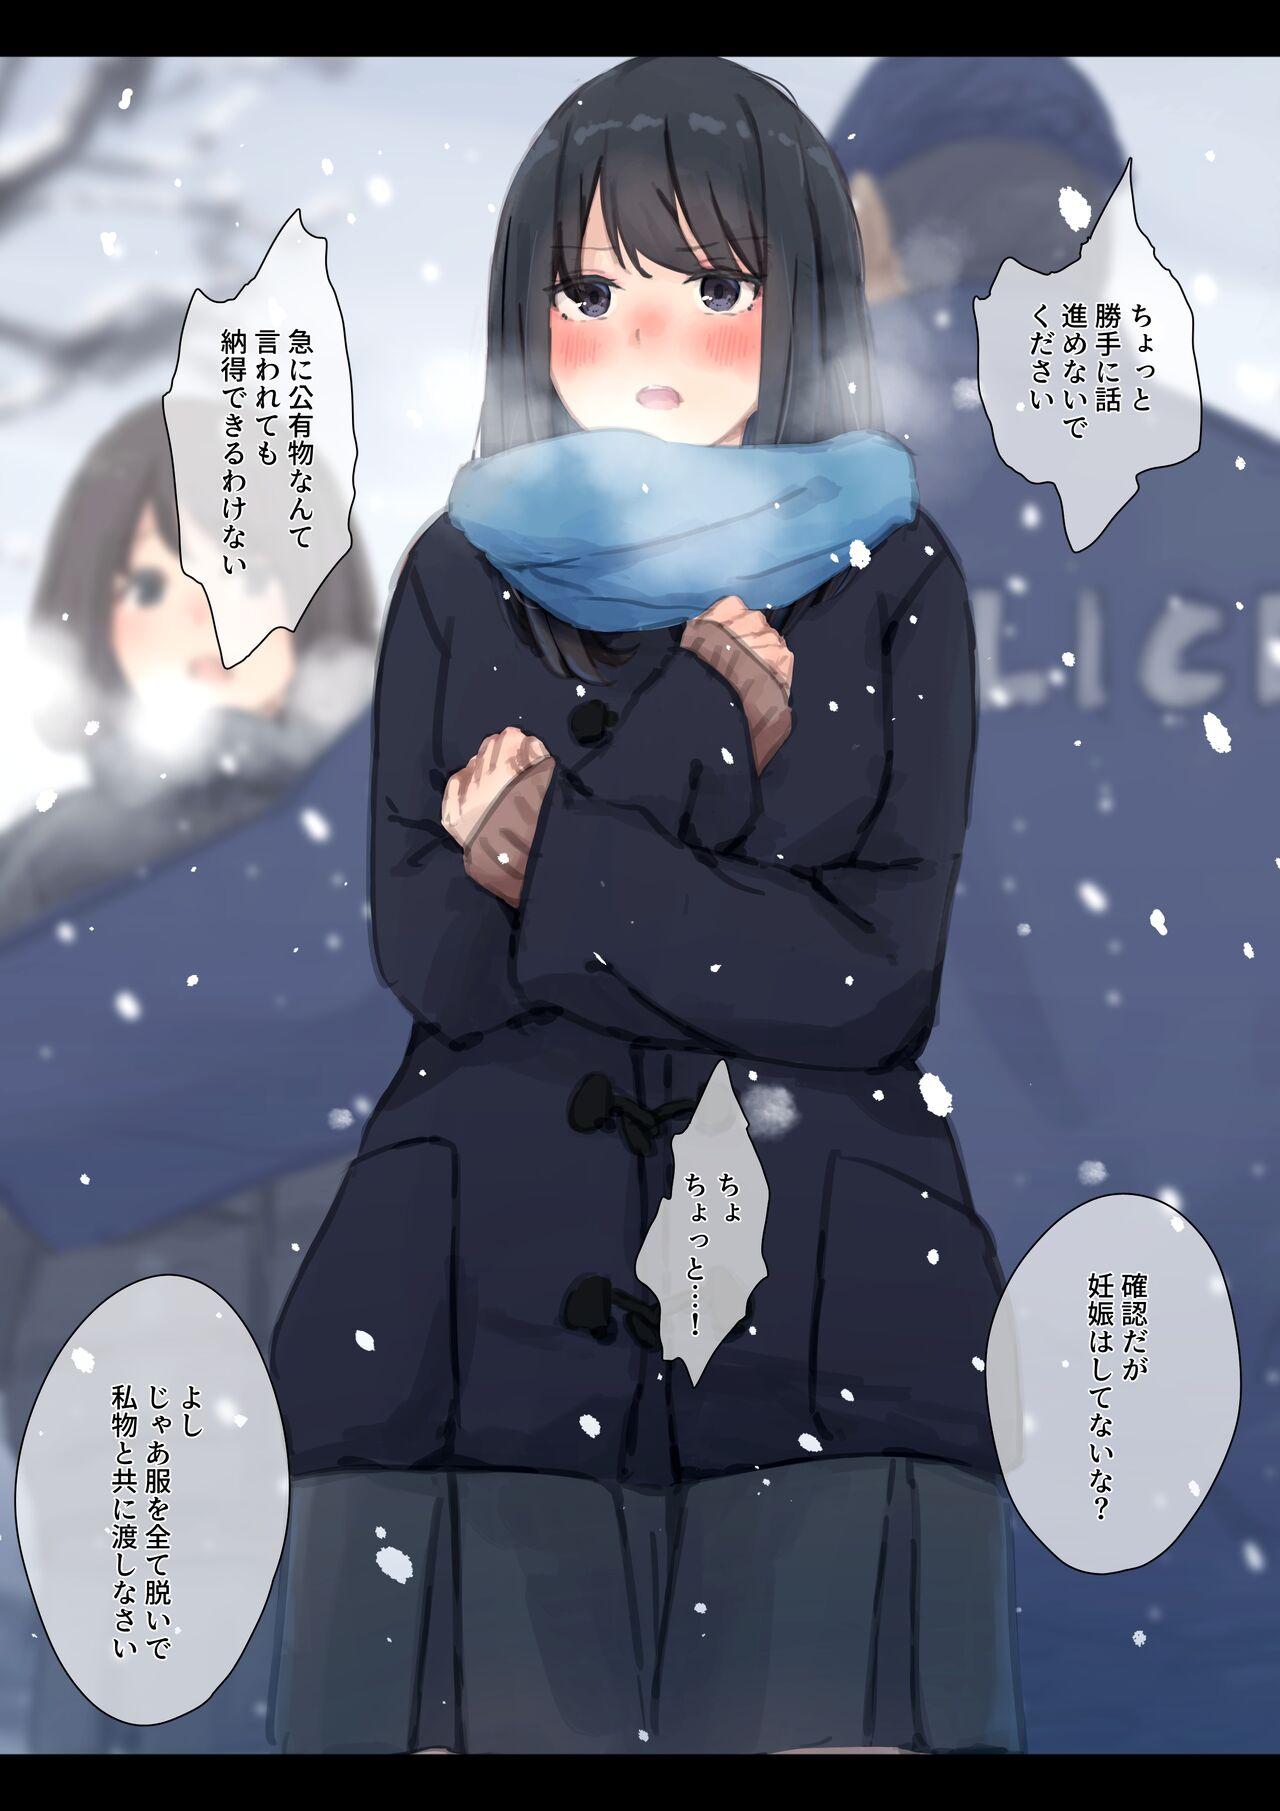 [Yukimuramaru] Public property Sex Slave Girl - Ex - Collection in the Snow - [Digital] [Ongoing] 16